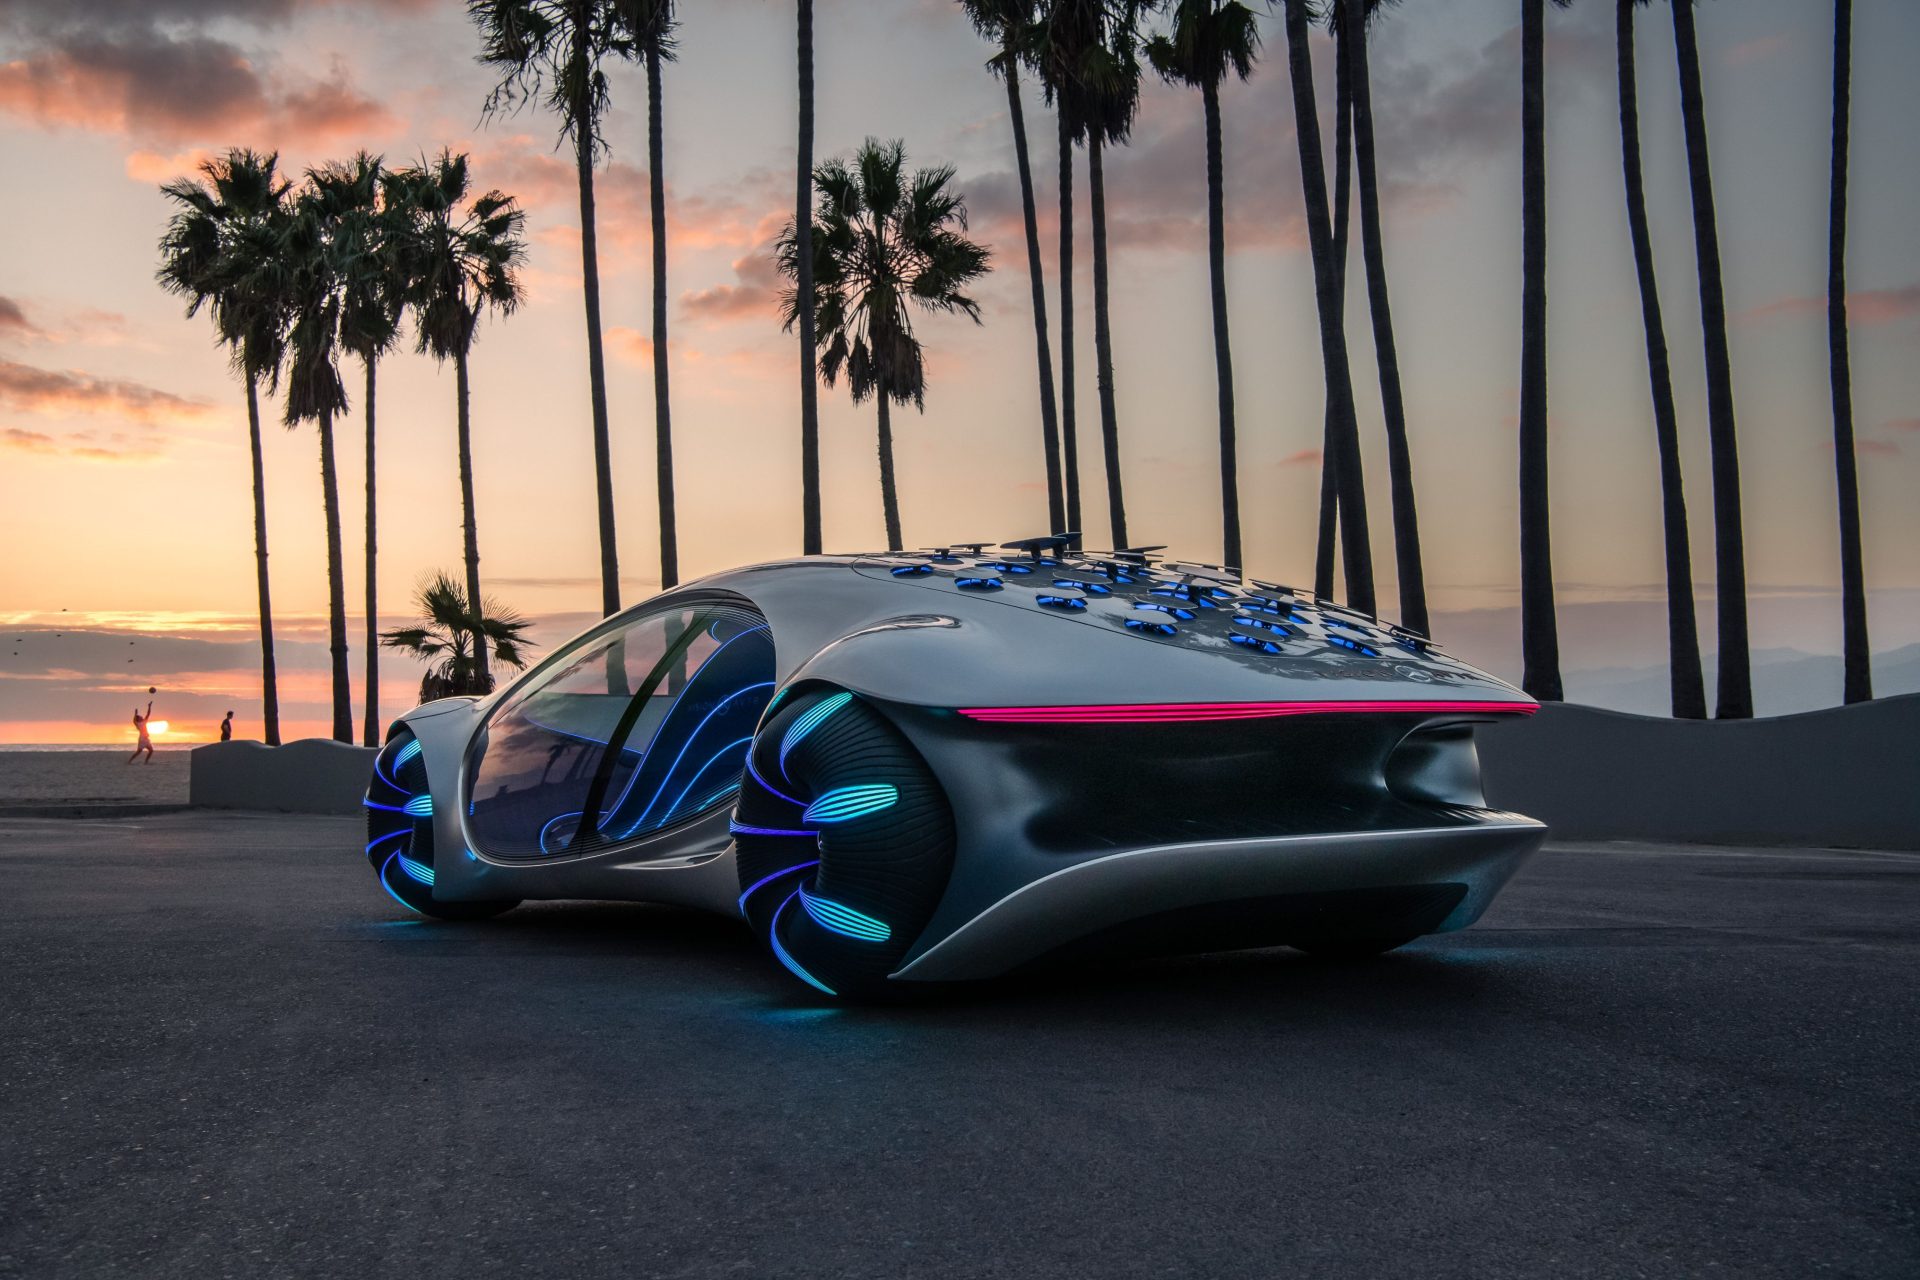 We Drive The Mercedes-Benz Vision AVTR – The Futuristic Car Coming Out Of Avatar